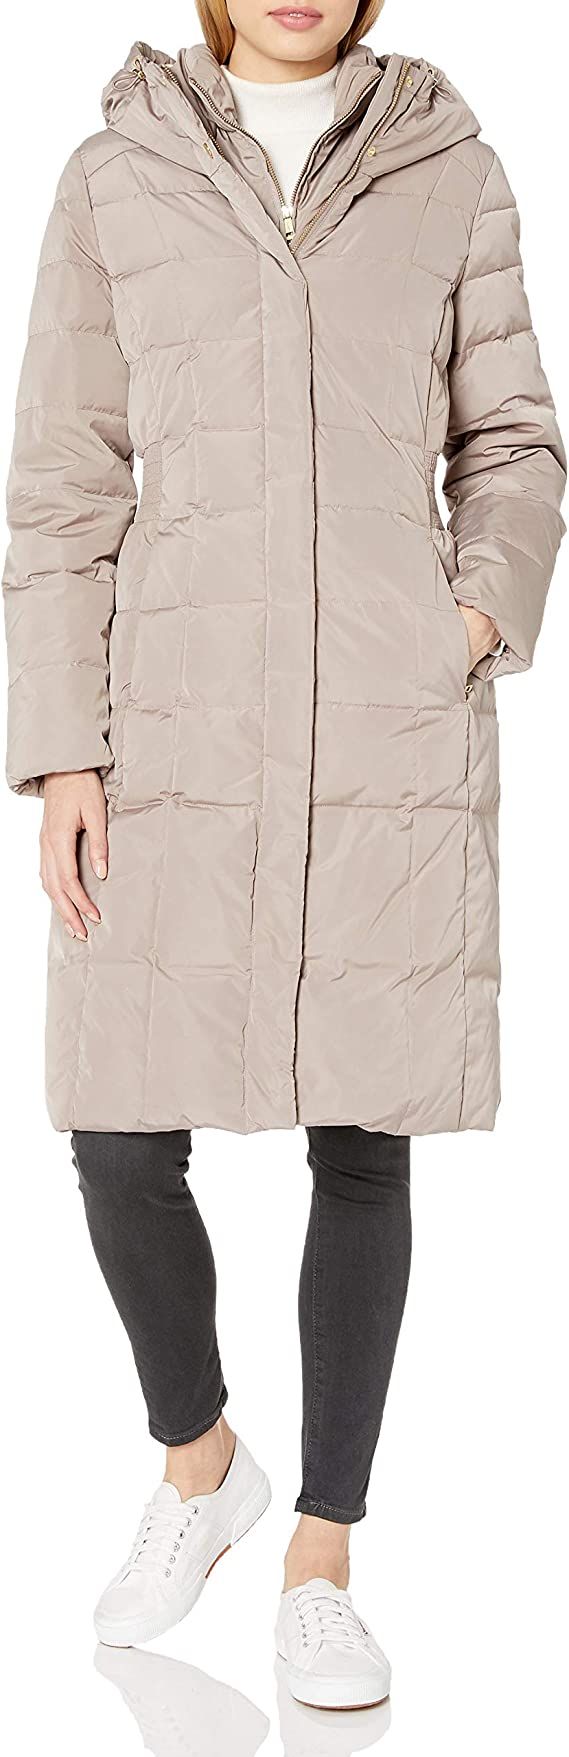 Cole Haan Filled Winter Coats for Women Trap Warmth with Bib Front & Dramatic Hood | Amazon (US)